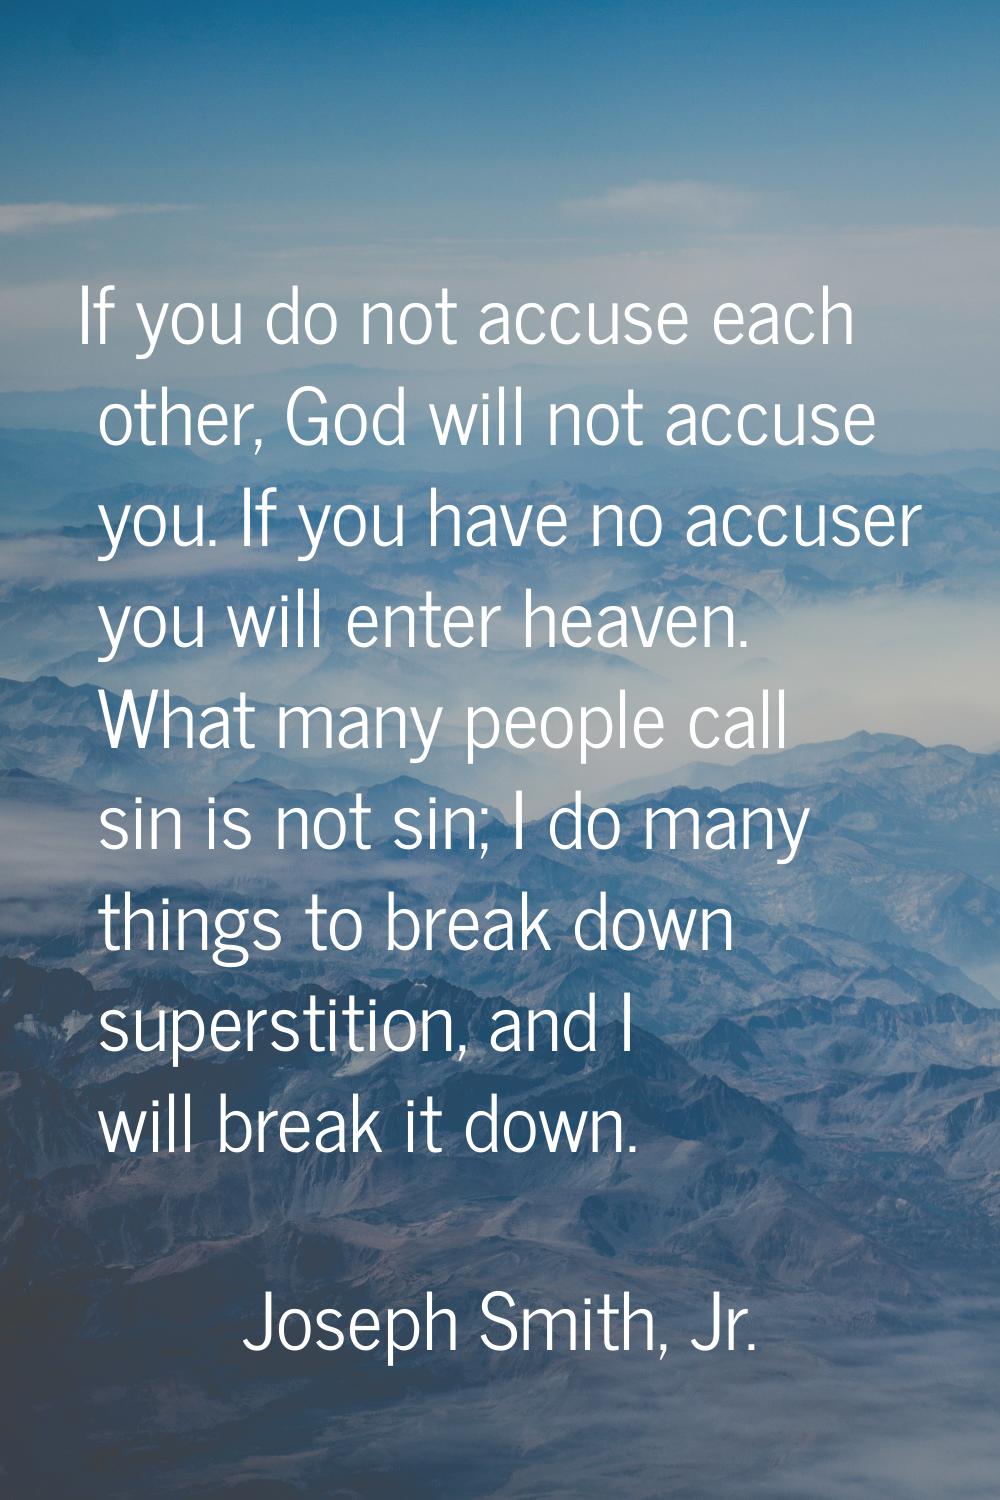 If you do not accuse each other, God will not accuse you. If you have no accuser you will enter hea